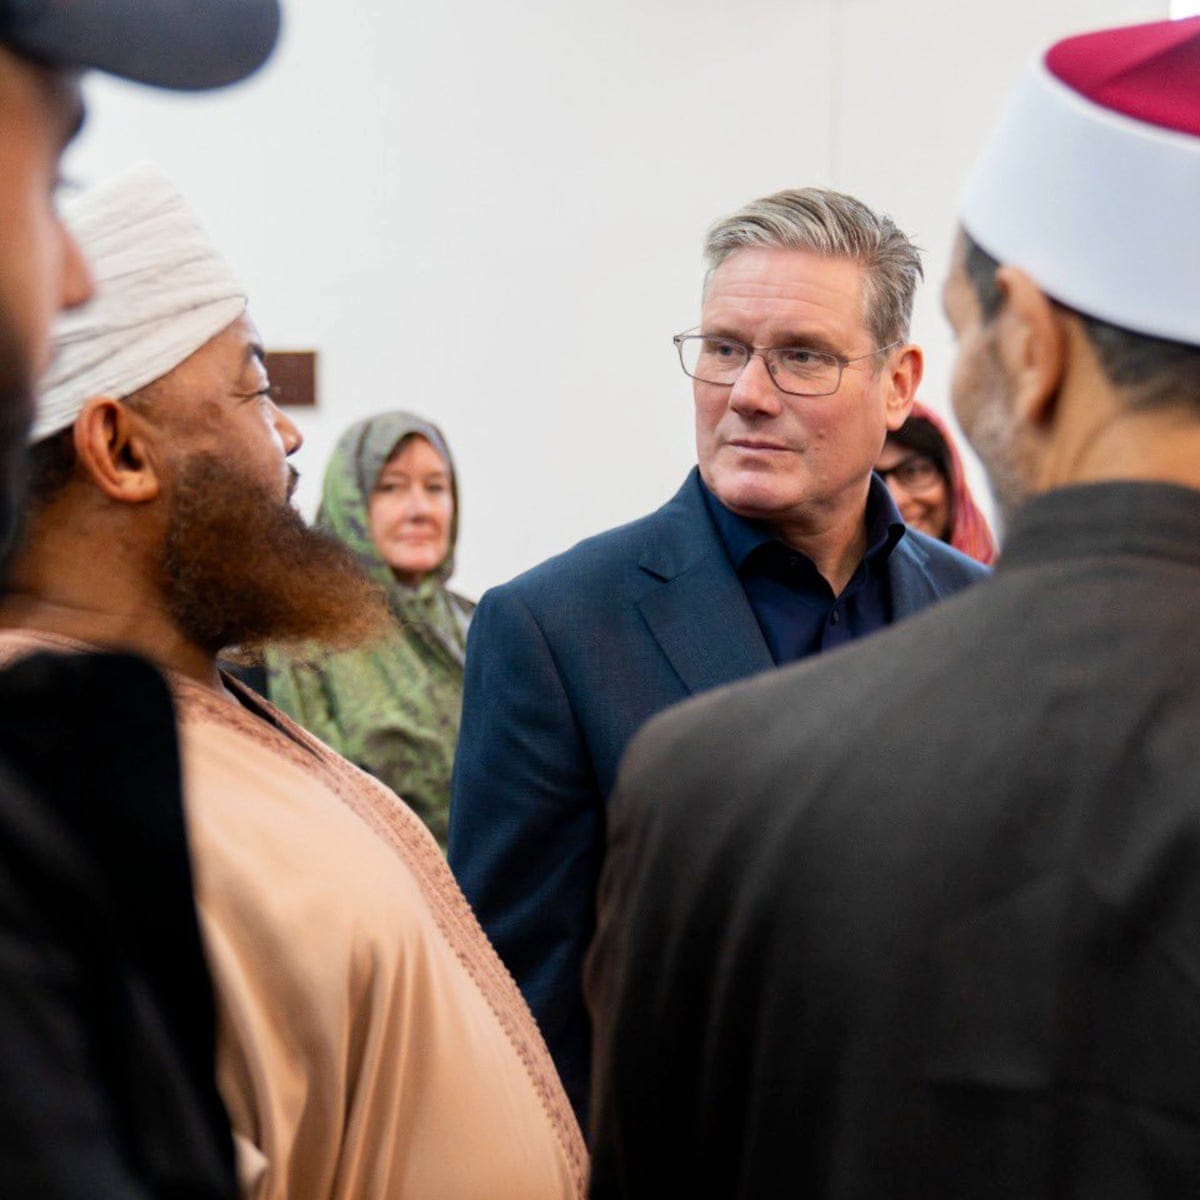 Starmer 'gravely misrepresented' meeting, say Muslim leaders in Wales |  Labour | The Guardian